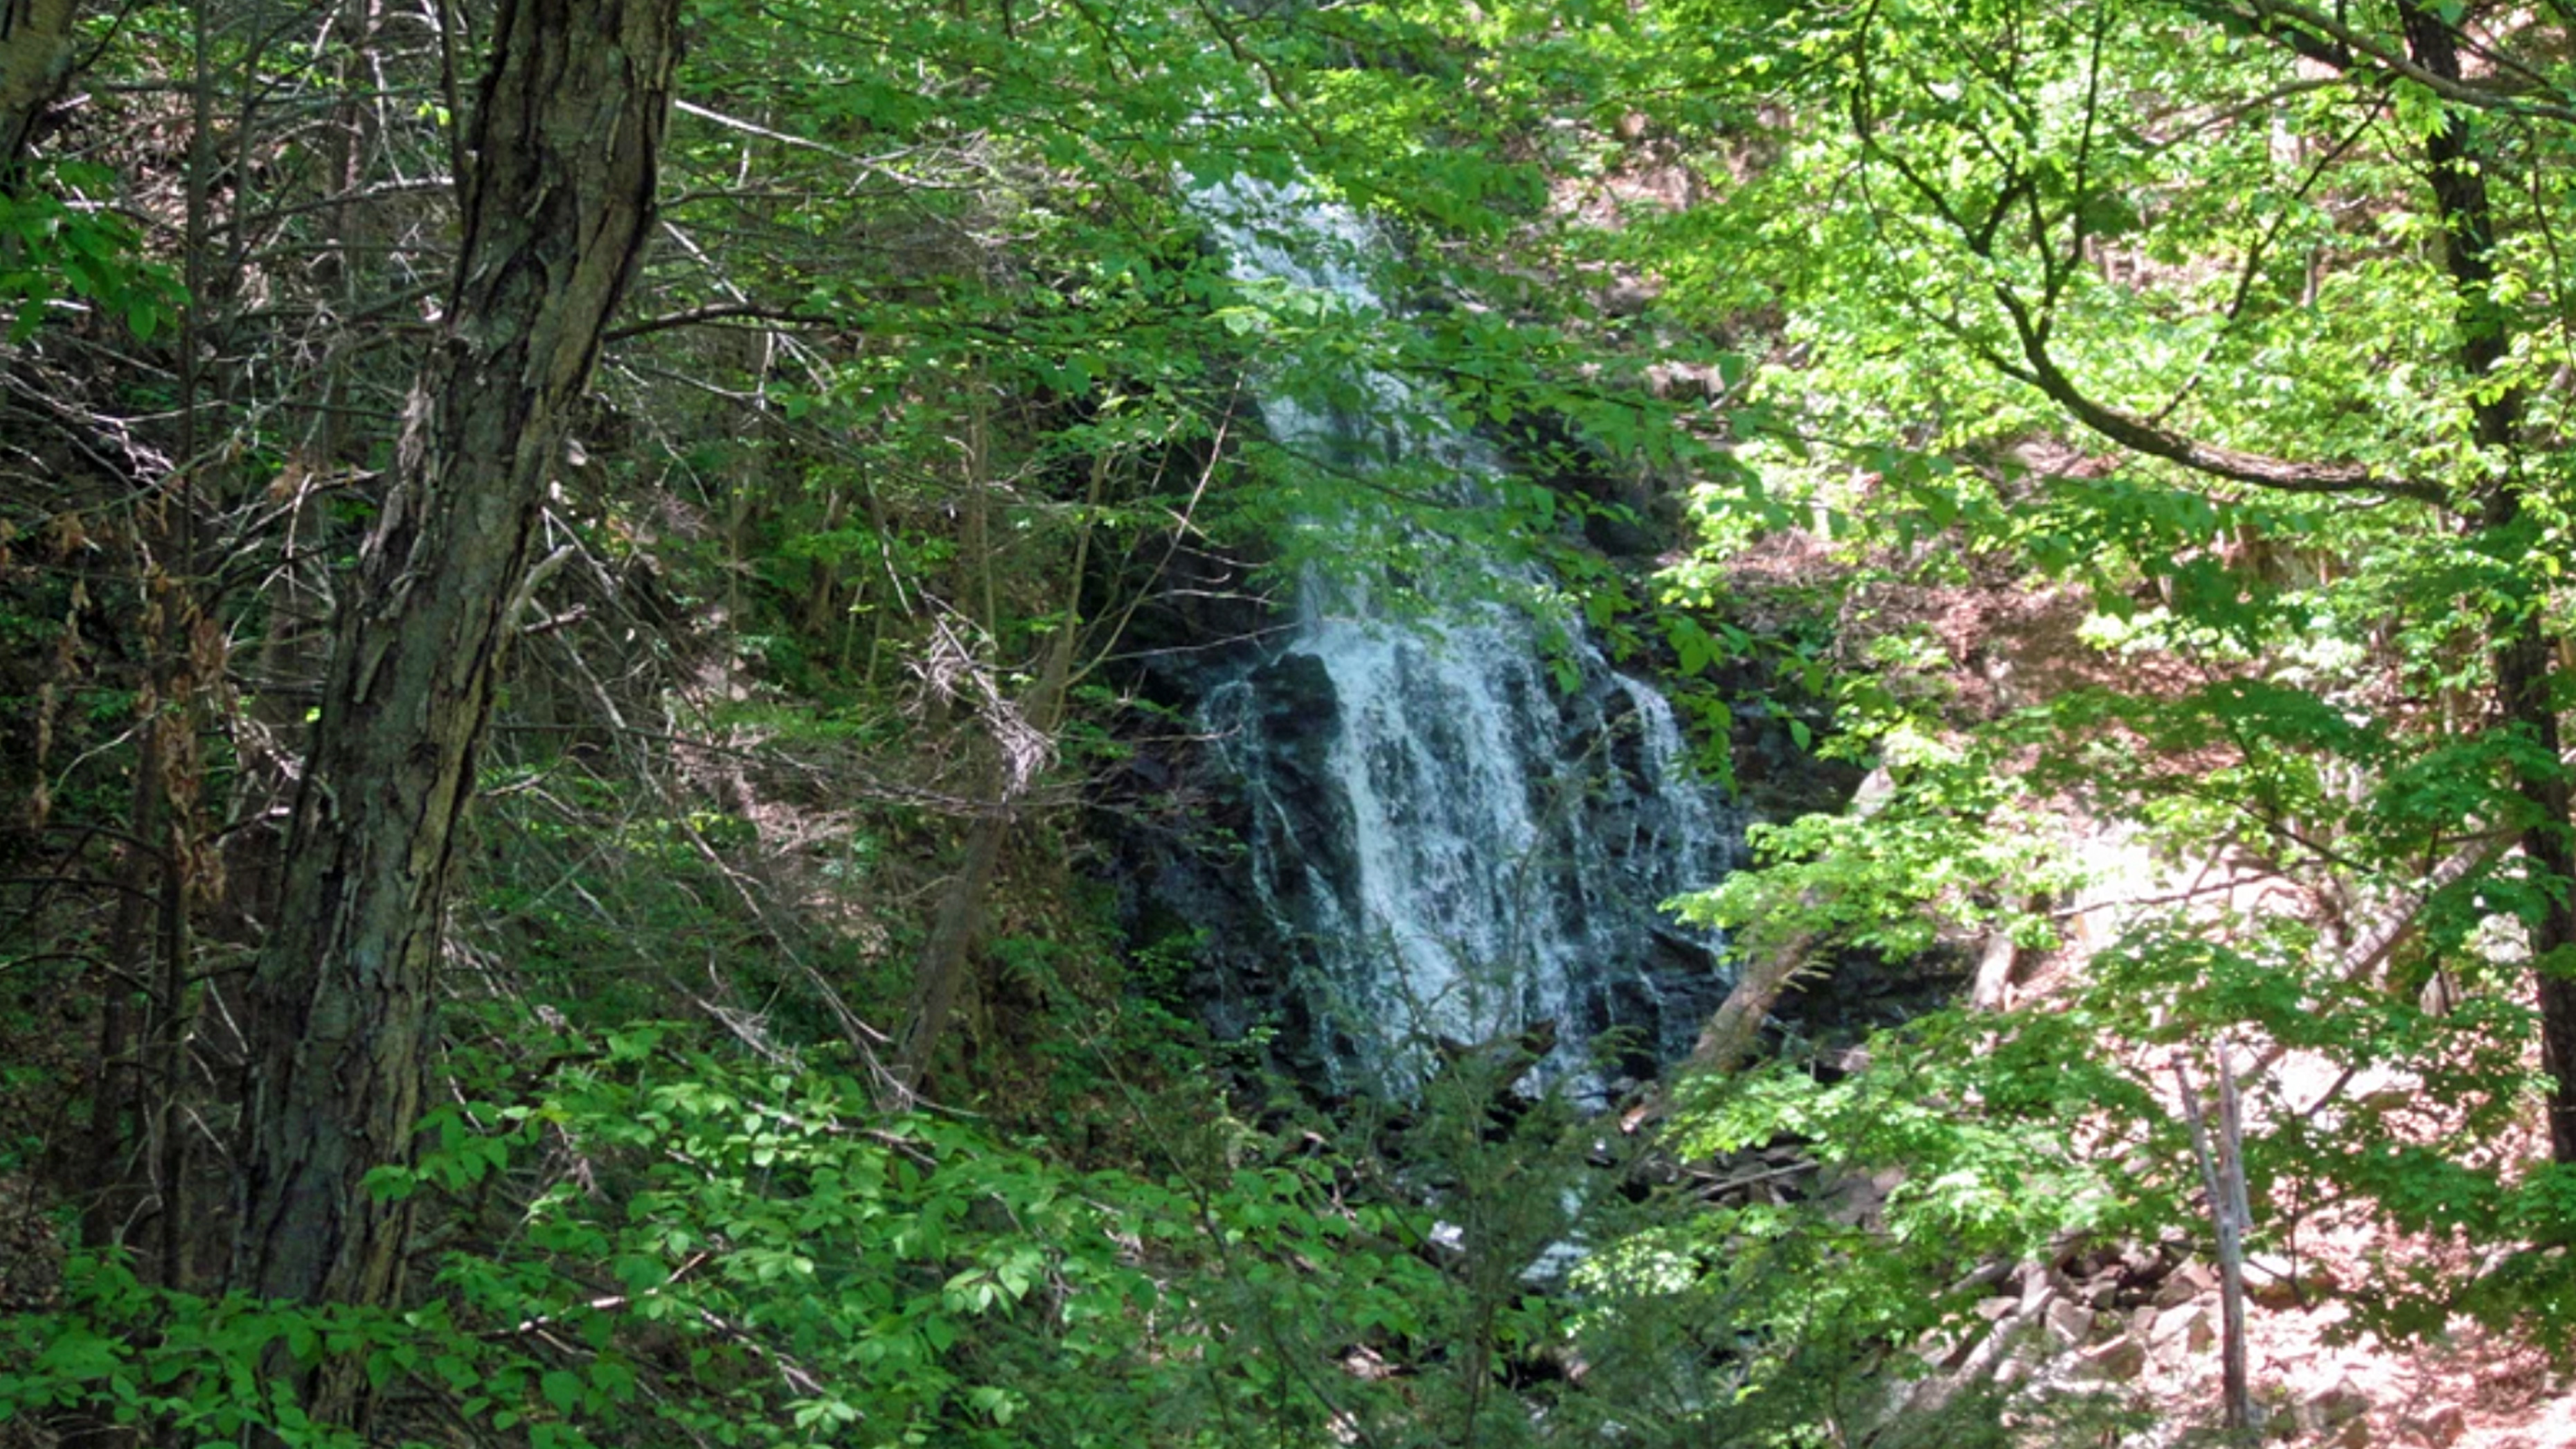 View of the Roaring Brook Falls waterfall in Cheshire, Connecticut